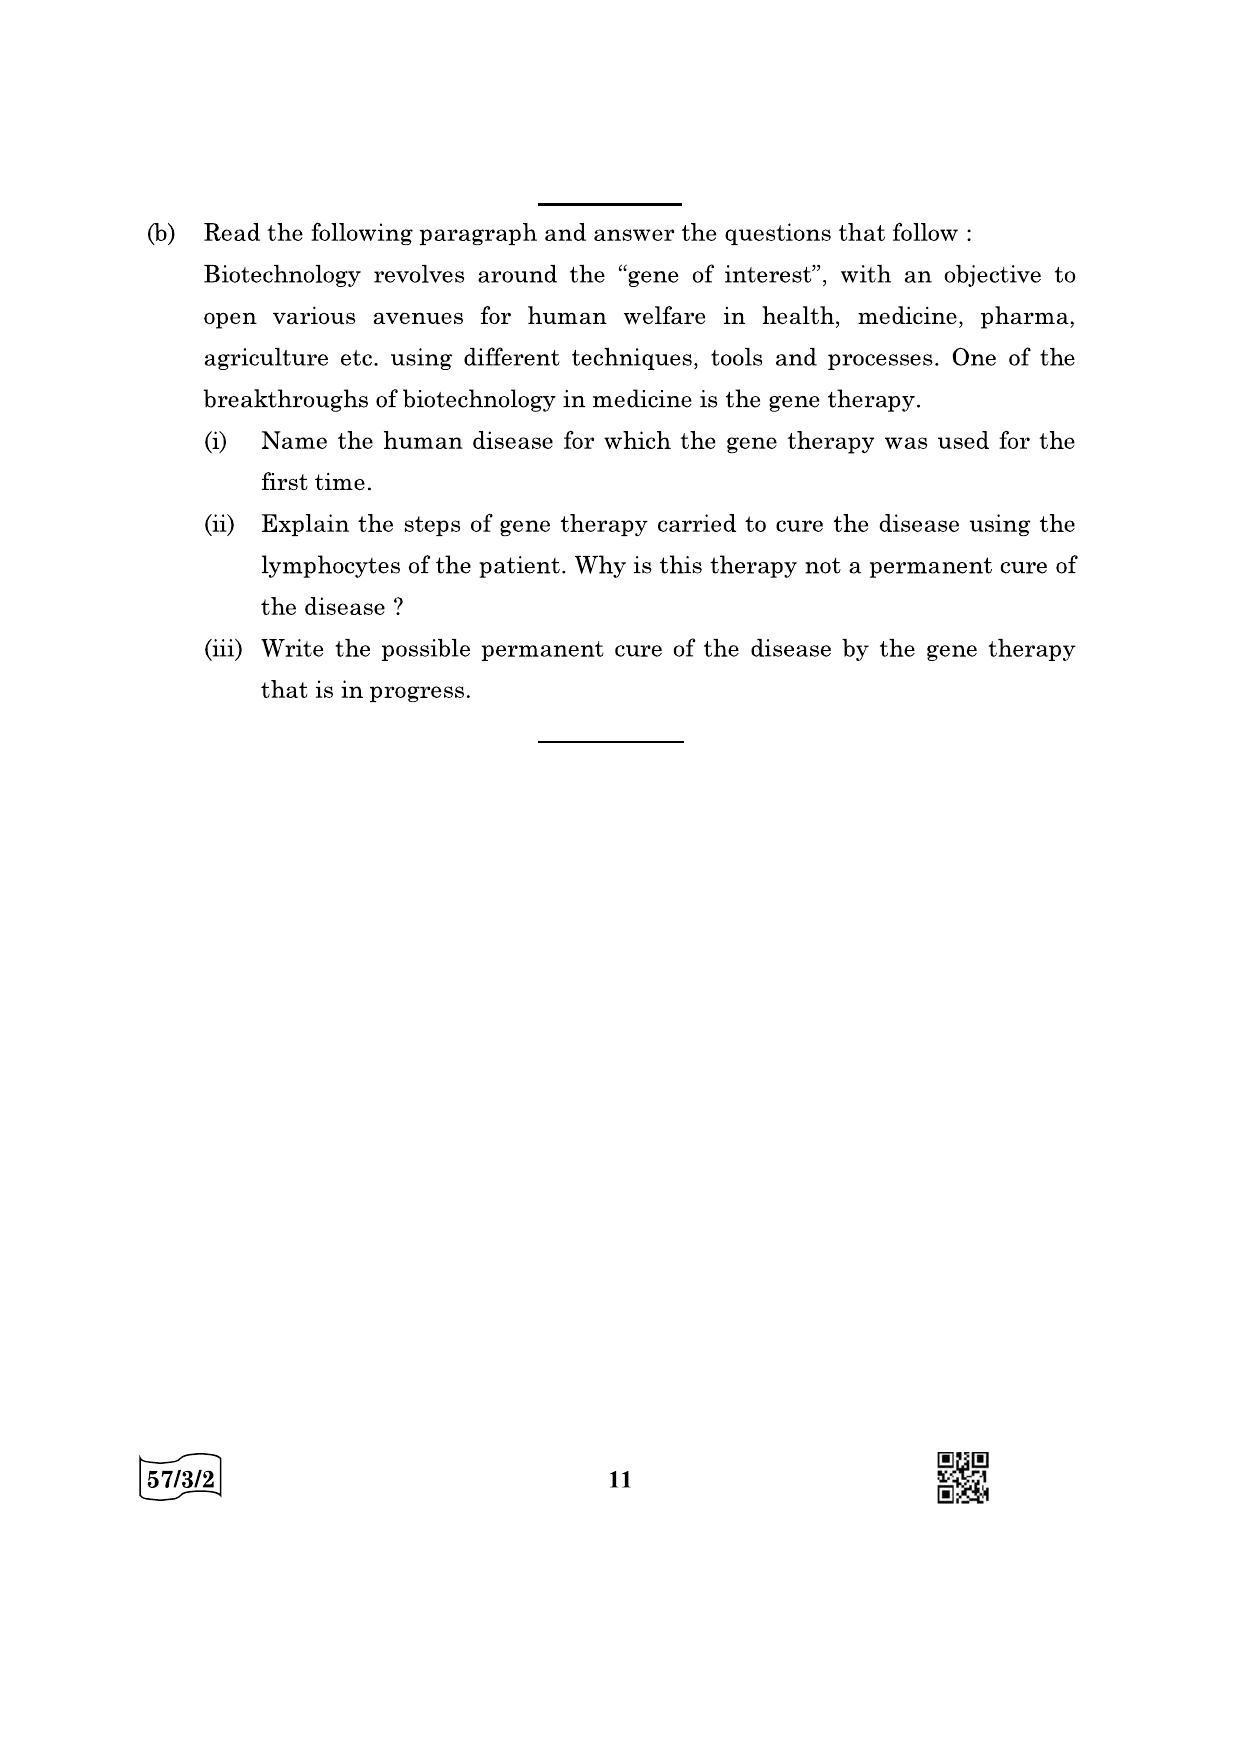 CBSE Class 12 57-3-2 Biology 2022 Question Paper - Page 11